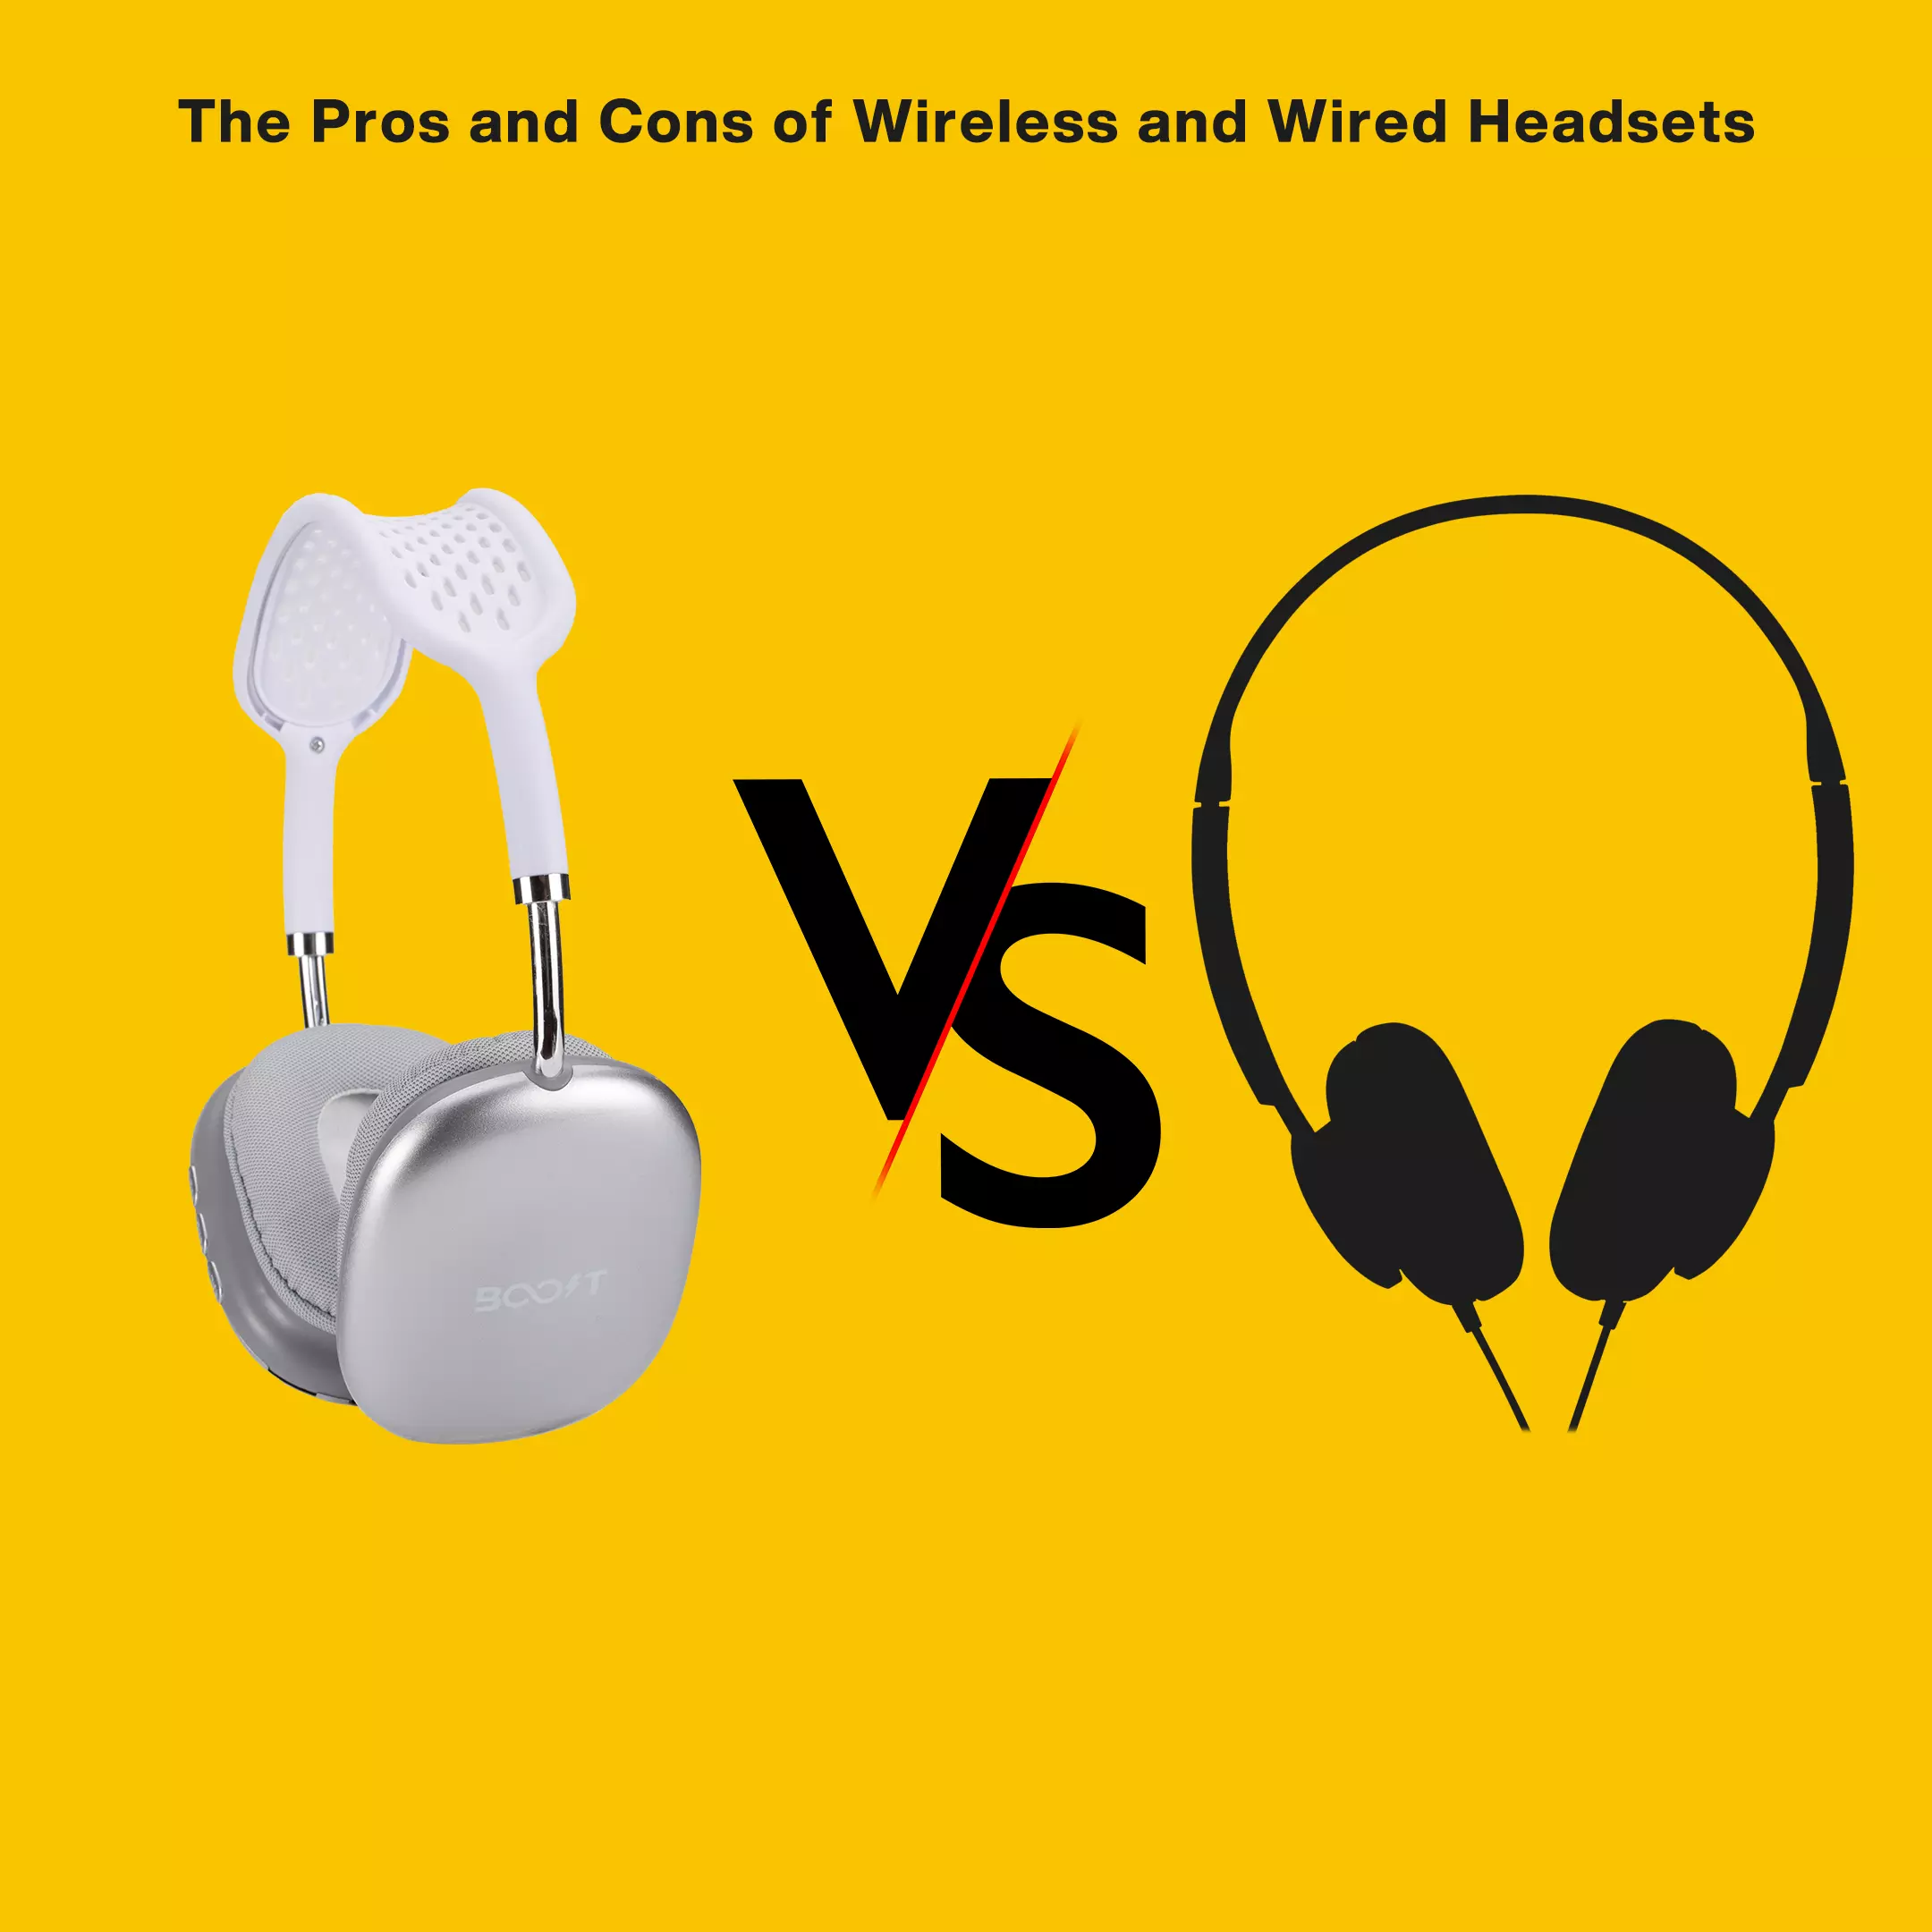 pros and cons of wireless headsets